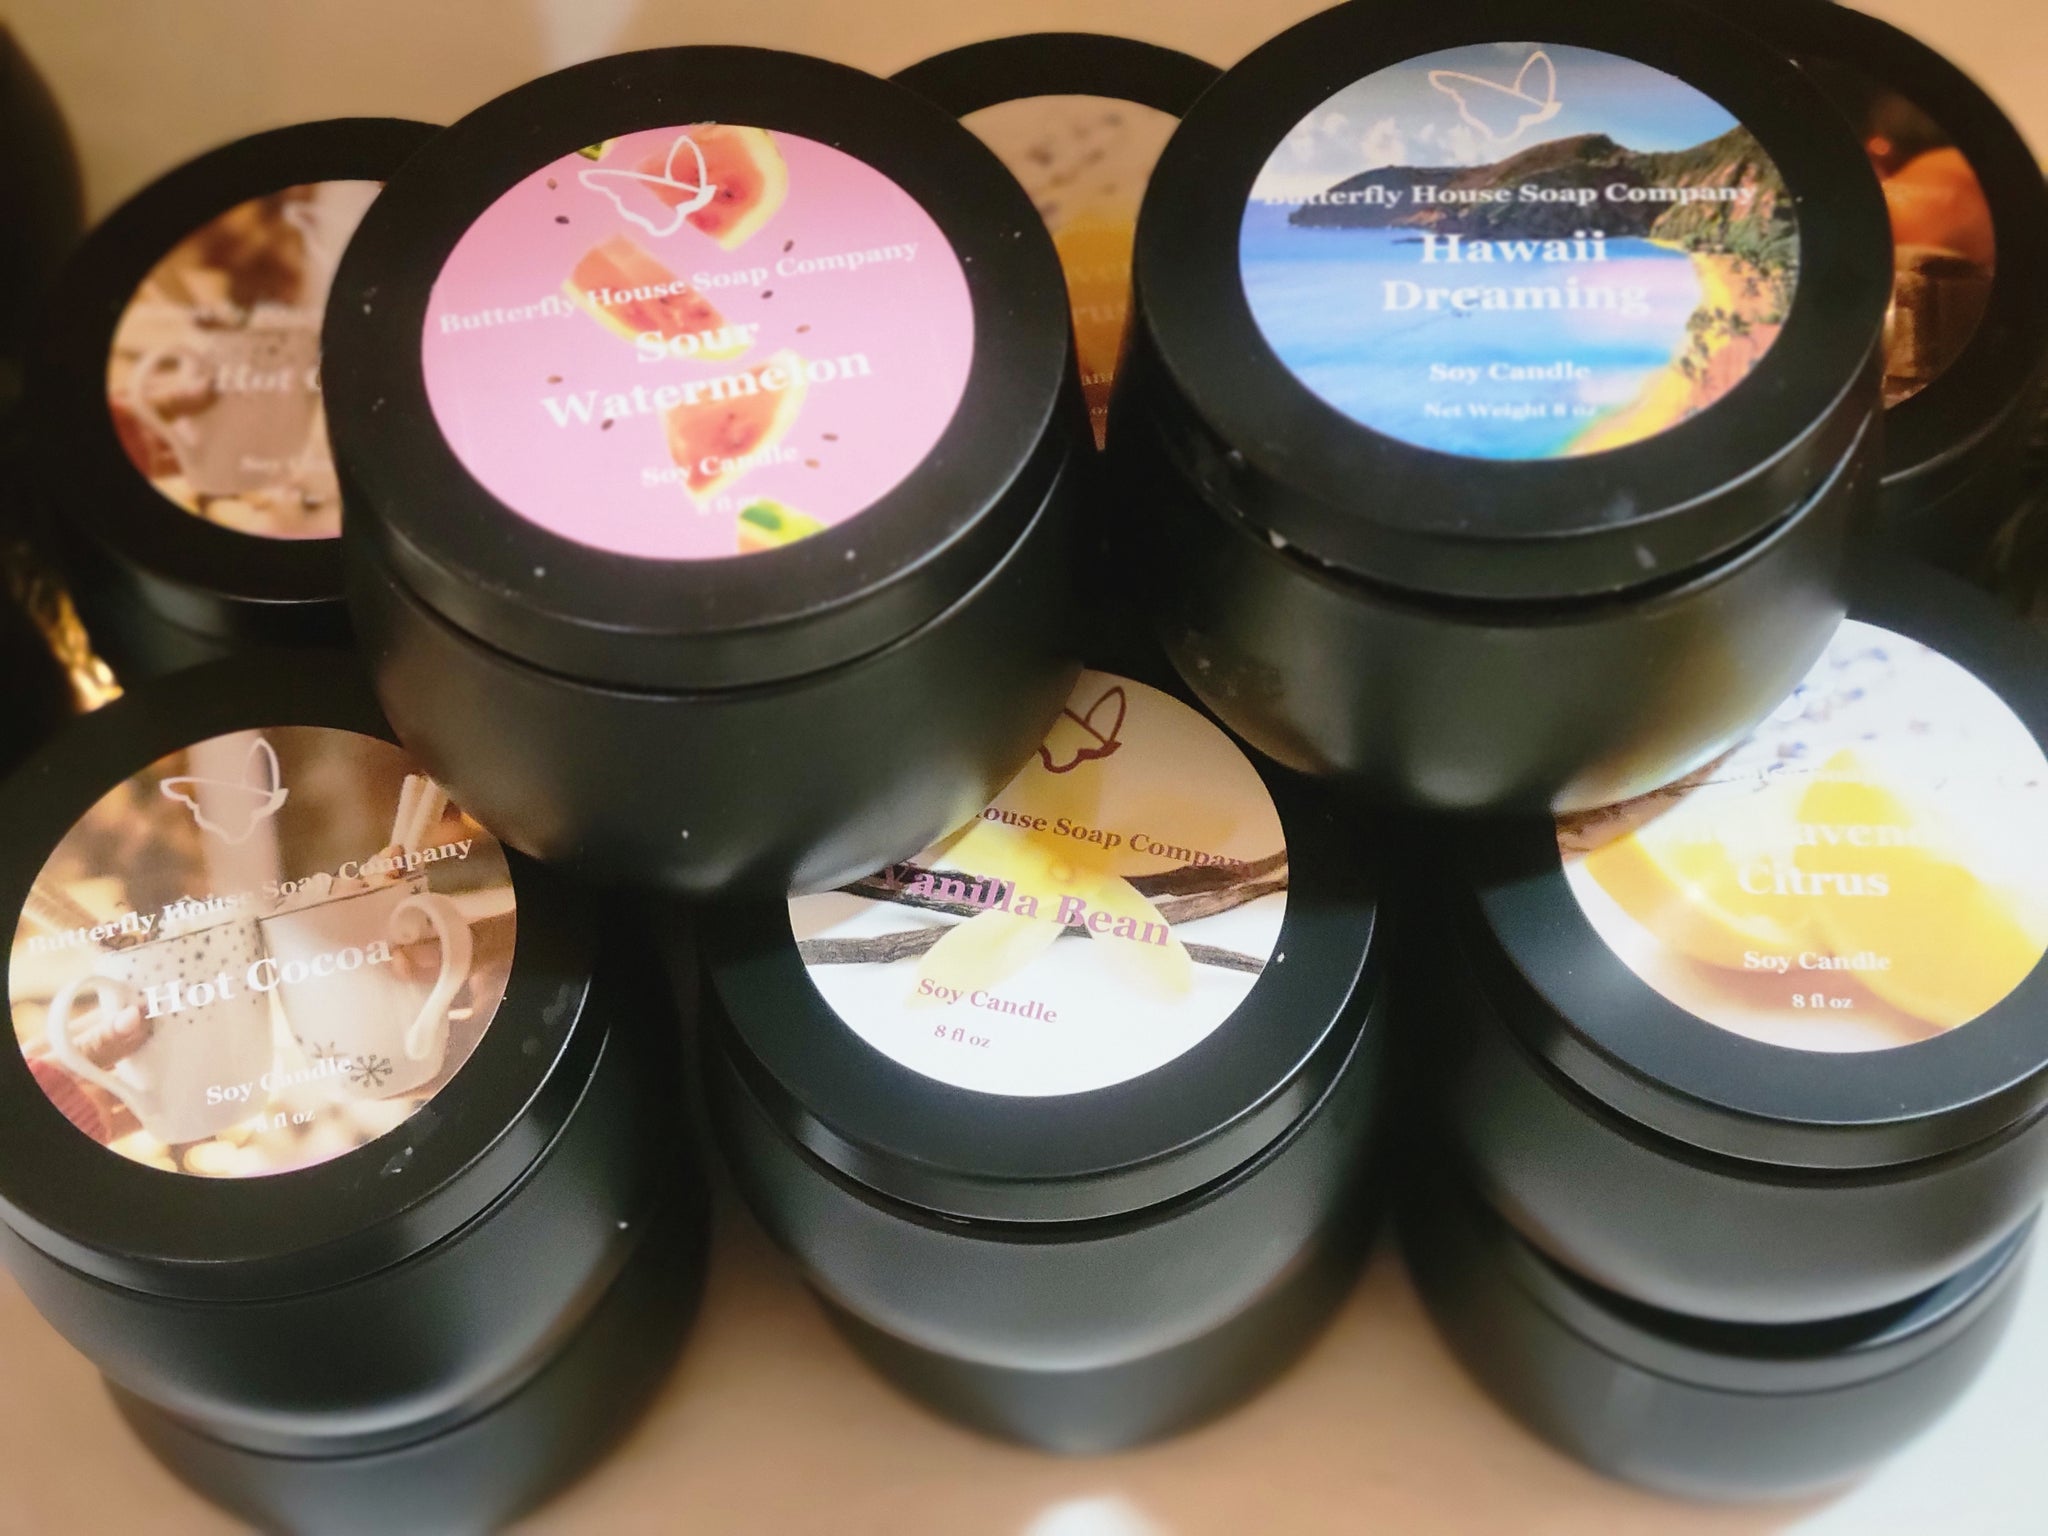 8 fl oz Candle Tins – Butterfly House Soap Company